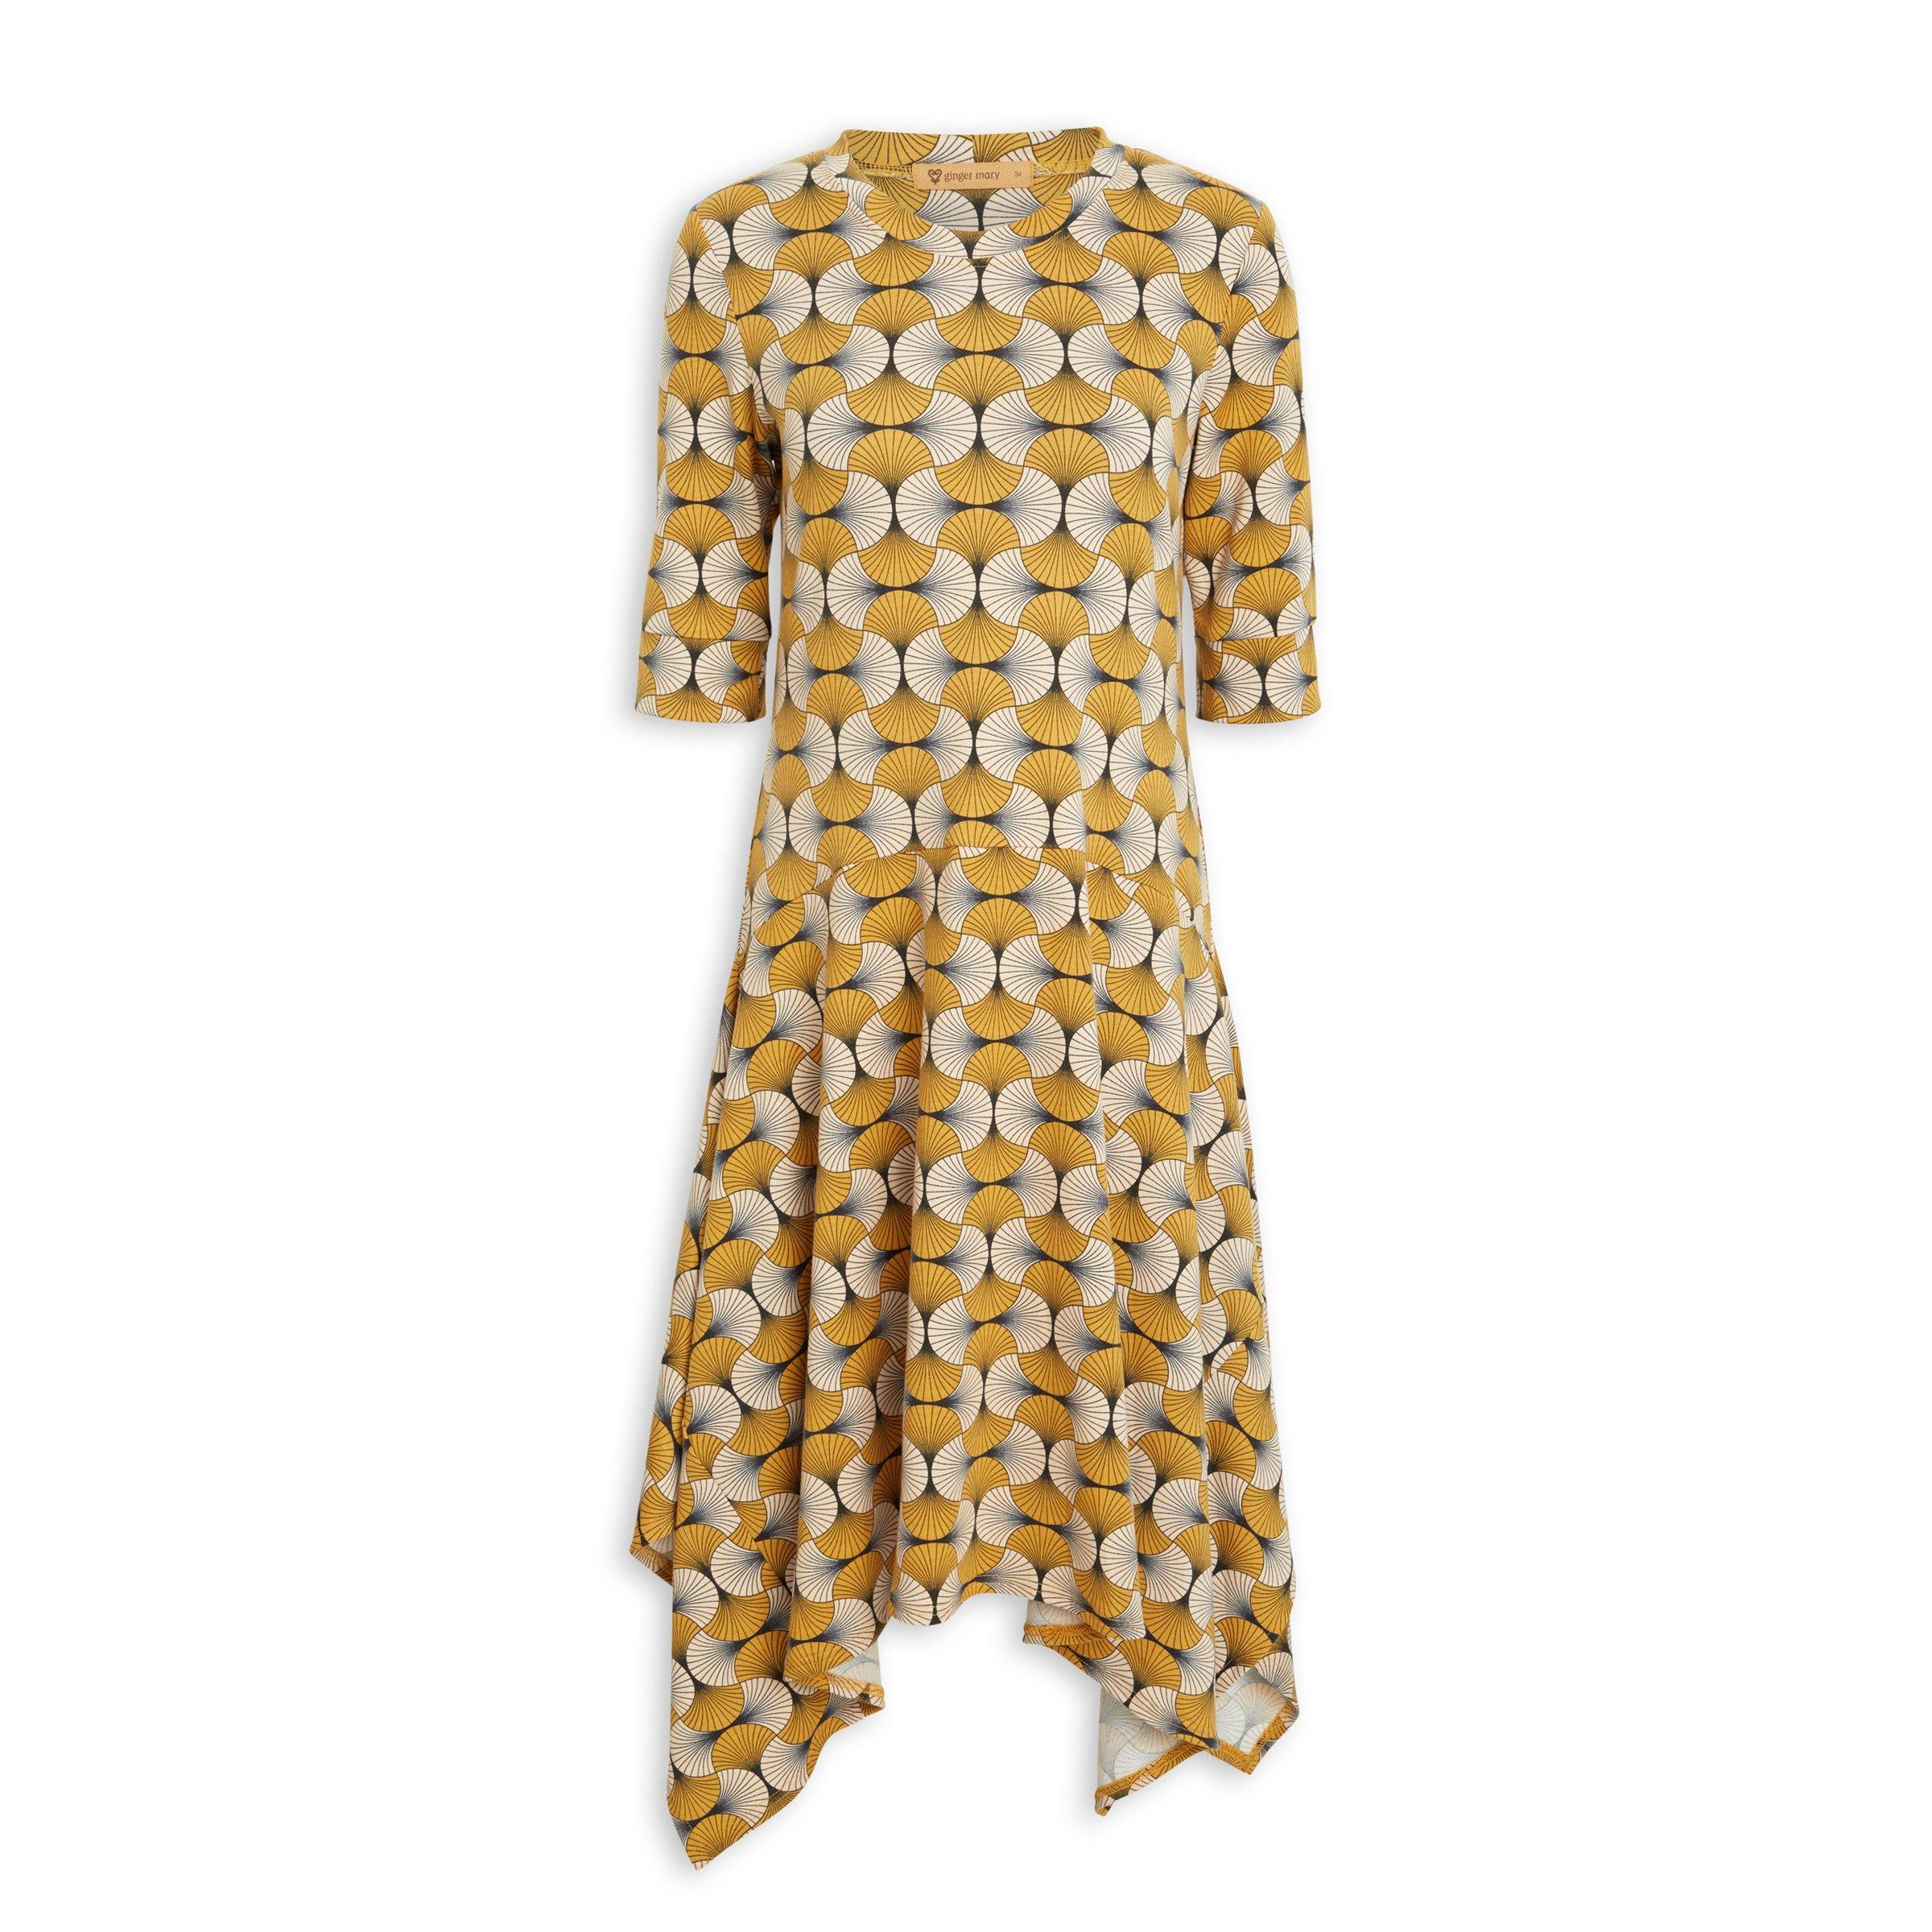 Buy Ginger Mary Yellow Print Dress Online | Truworths